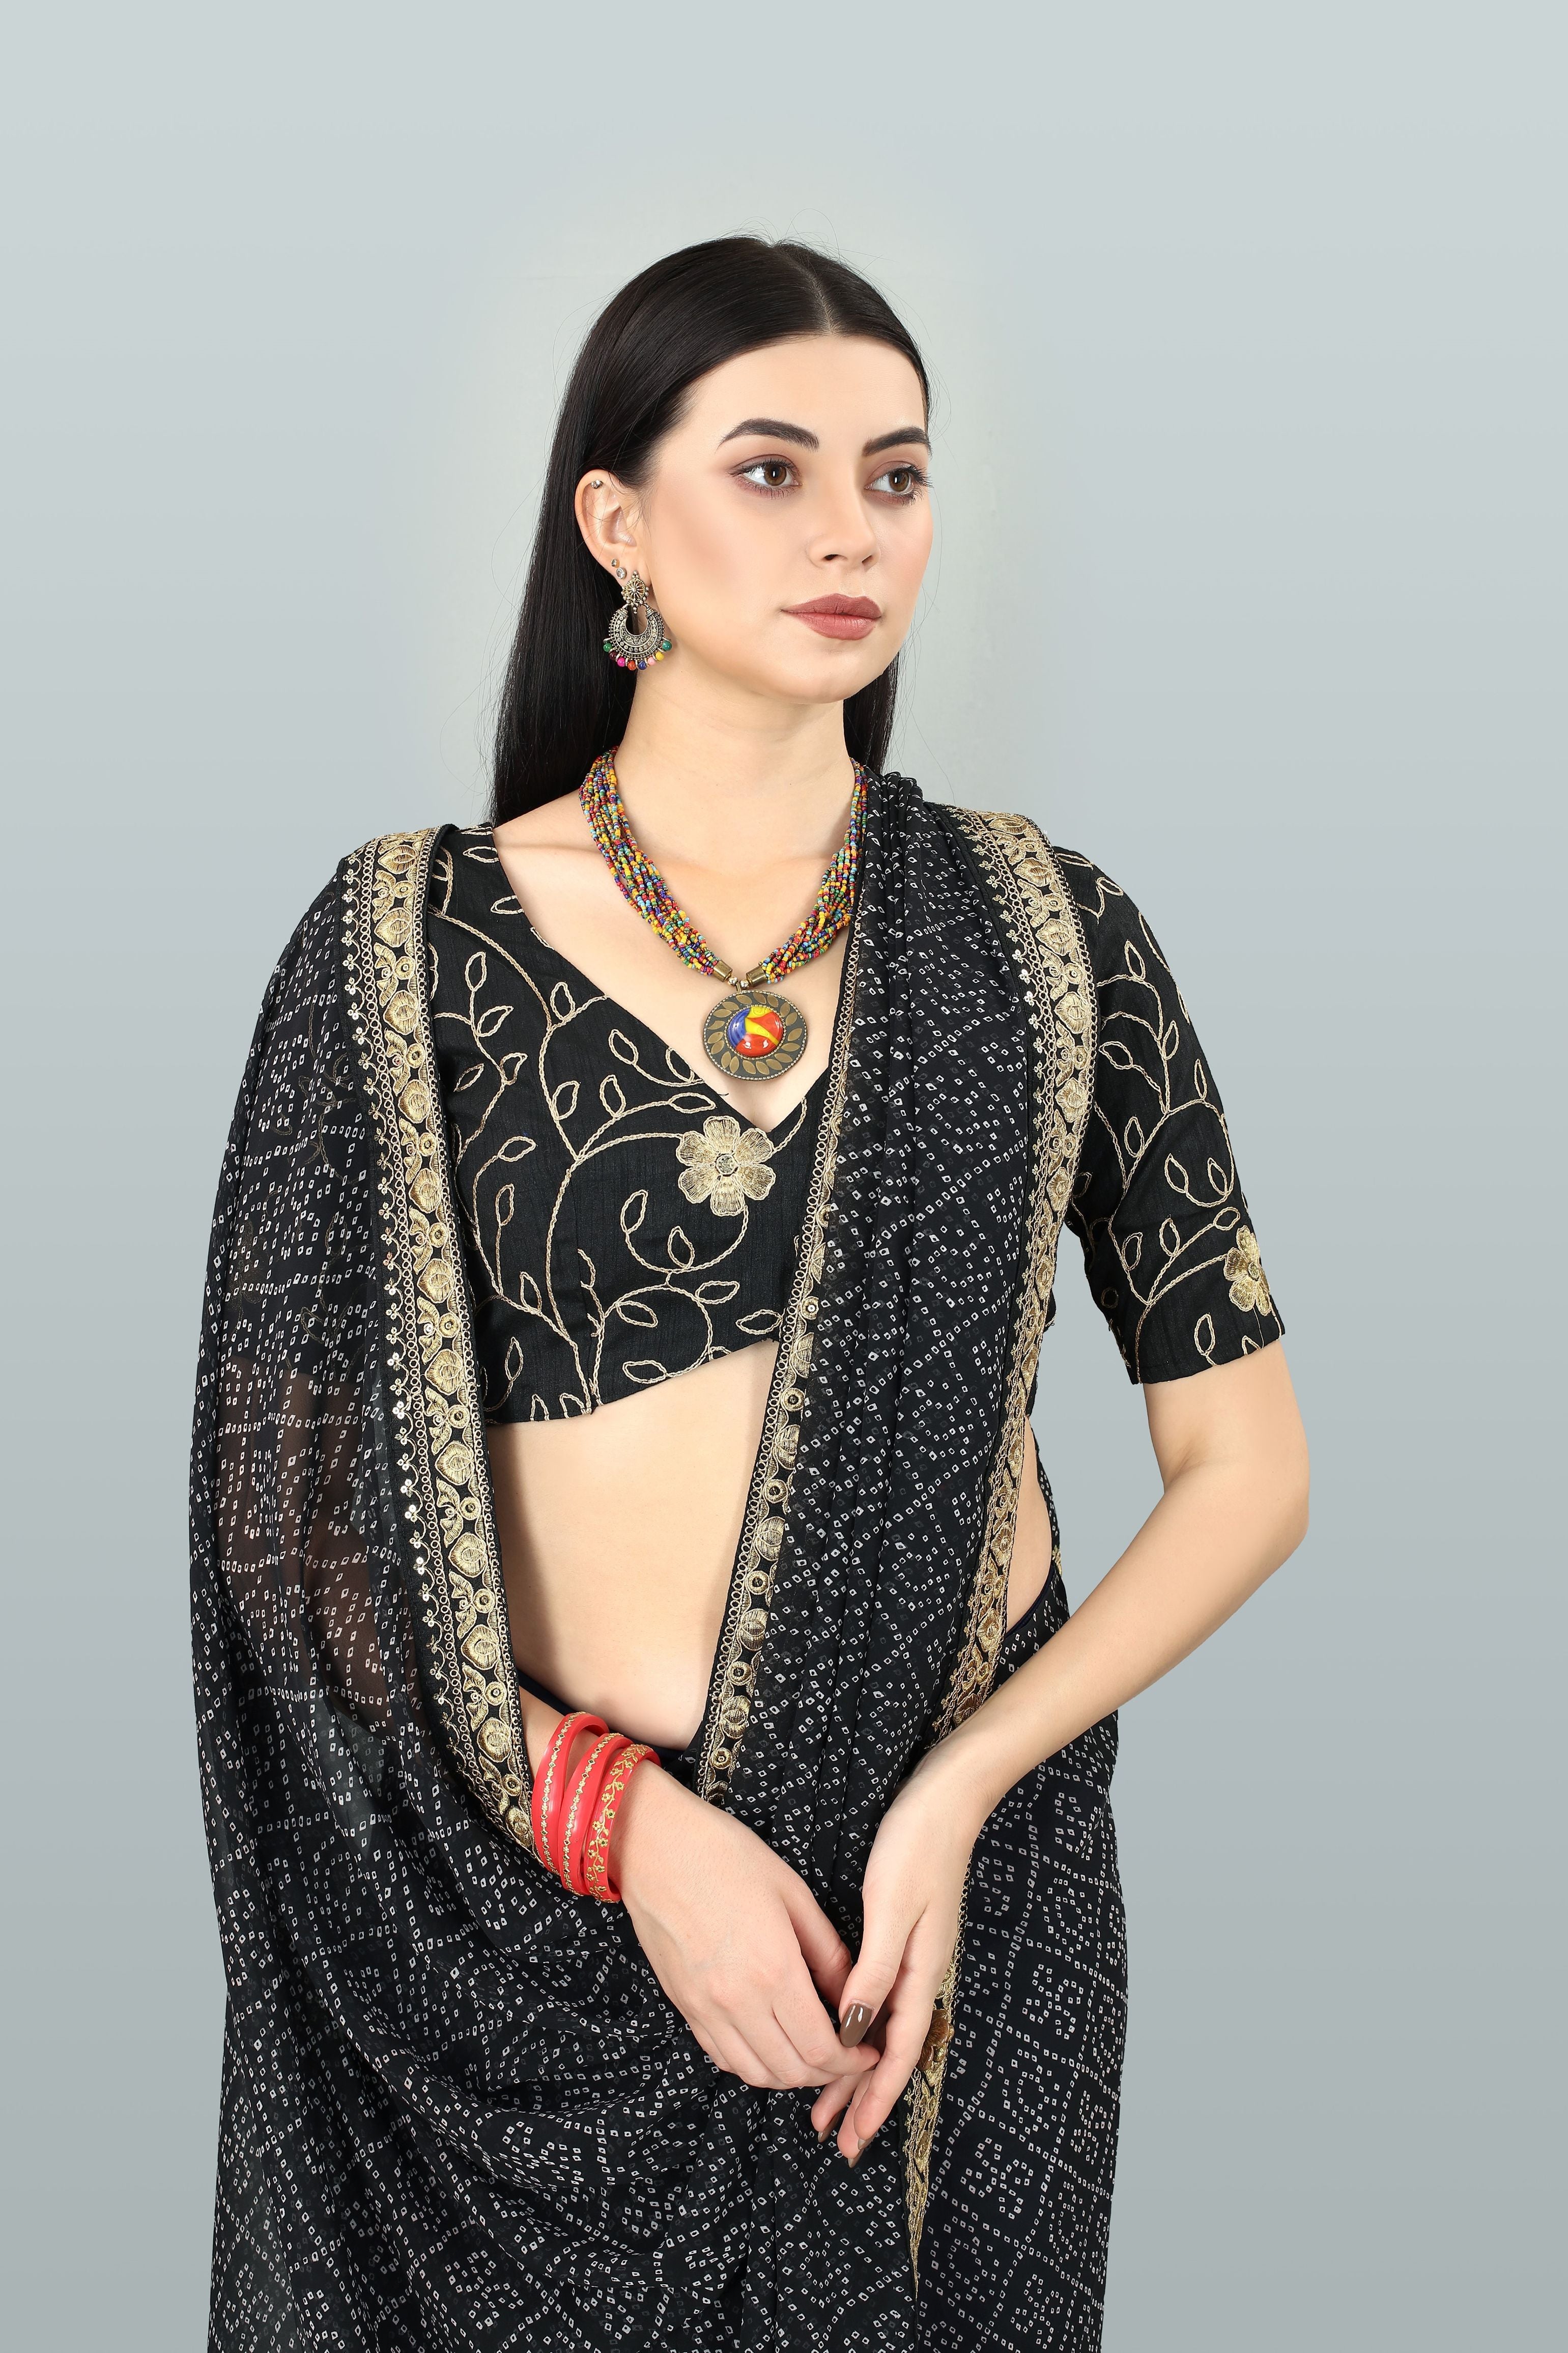 Printed & Embroidery Work In Lace Georgette Black Bandhani Saree For Women